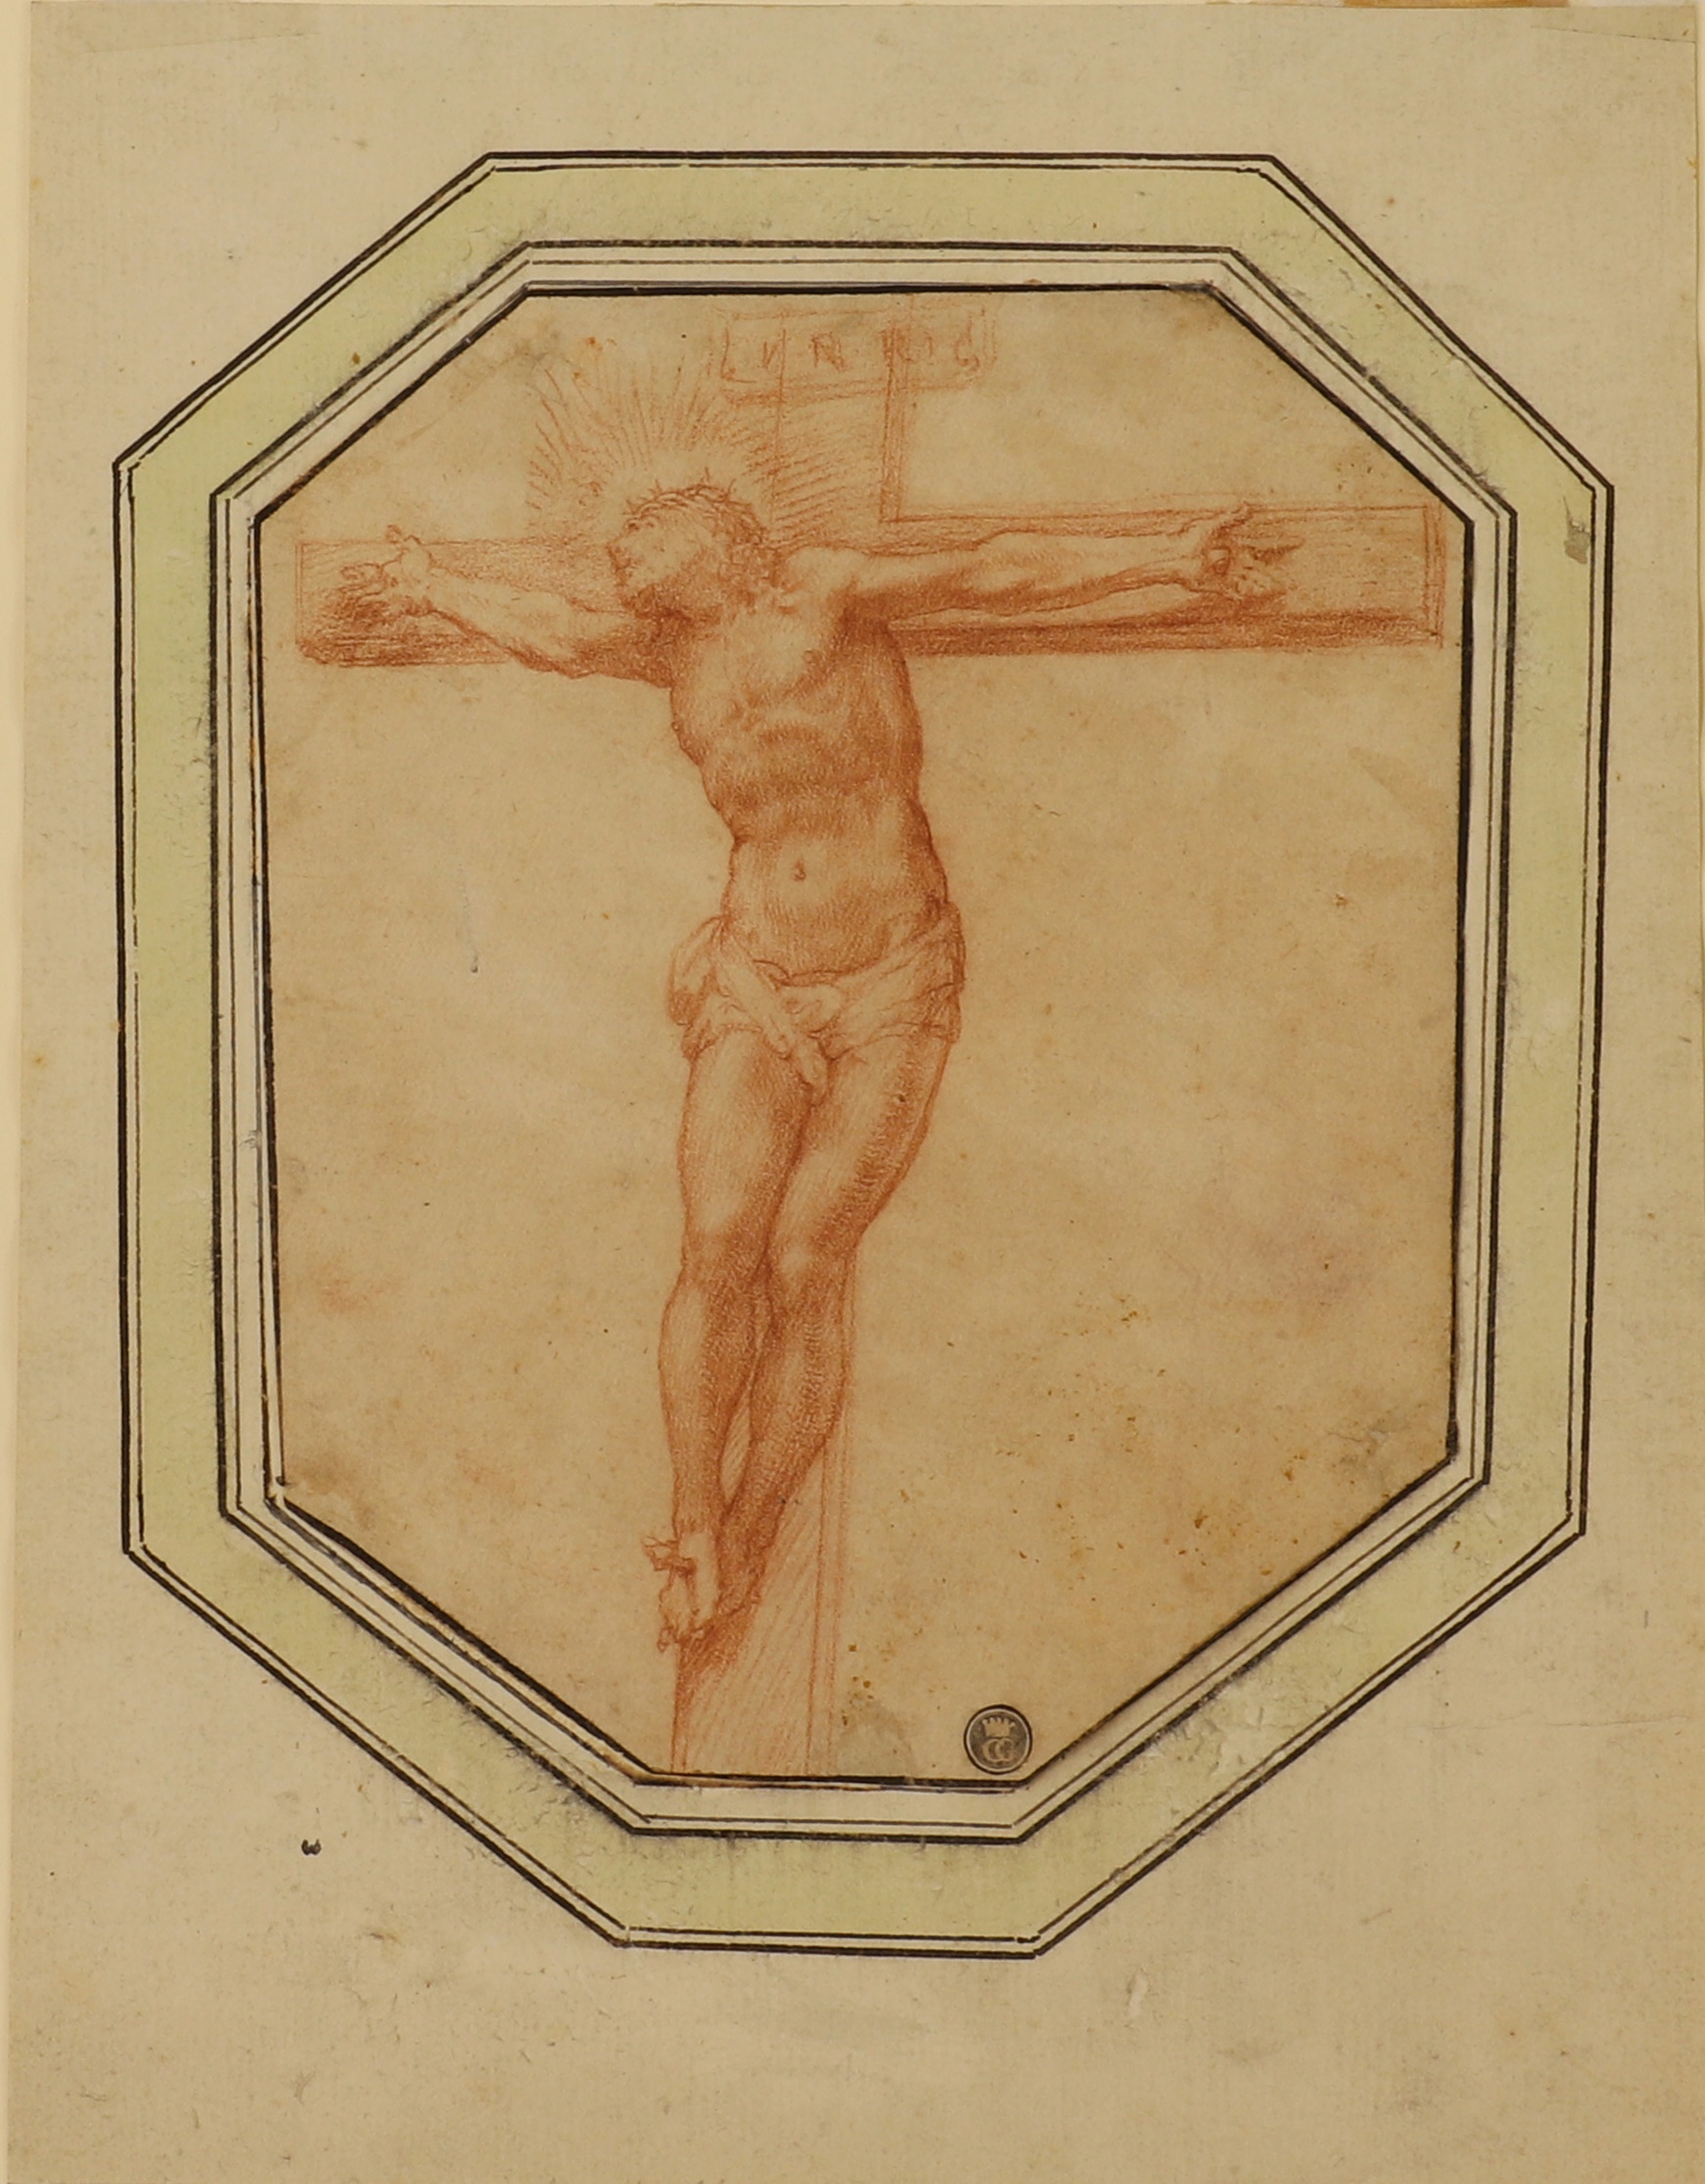 Attributed to Lelio Orsi da Novellara (Italian, 1511-1587) Christ on the Cross; verso, Christ's head and right arm stamped with collector's stamp l.r., red chalk, octagonal 18 x 15cm, unframed (£1,000-1,500)